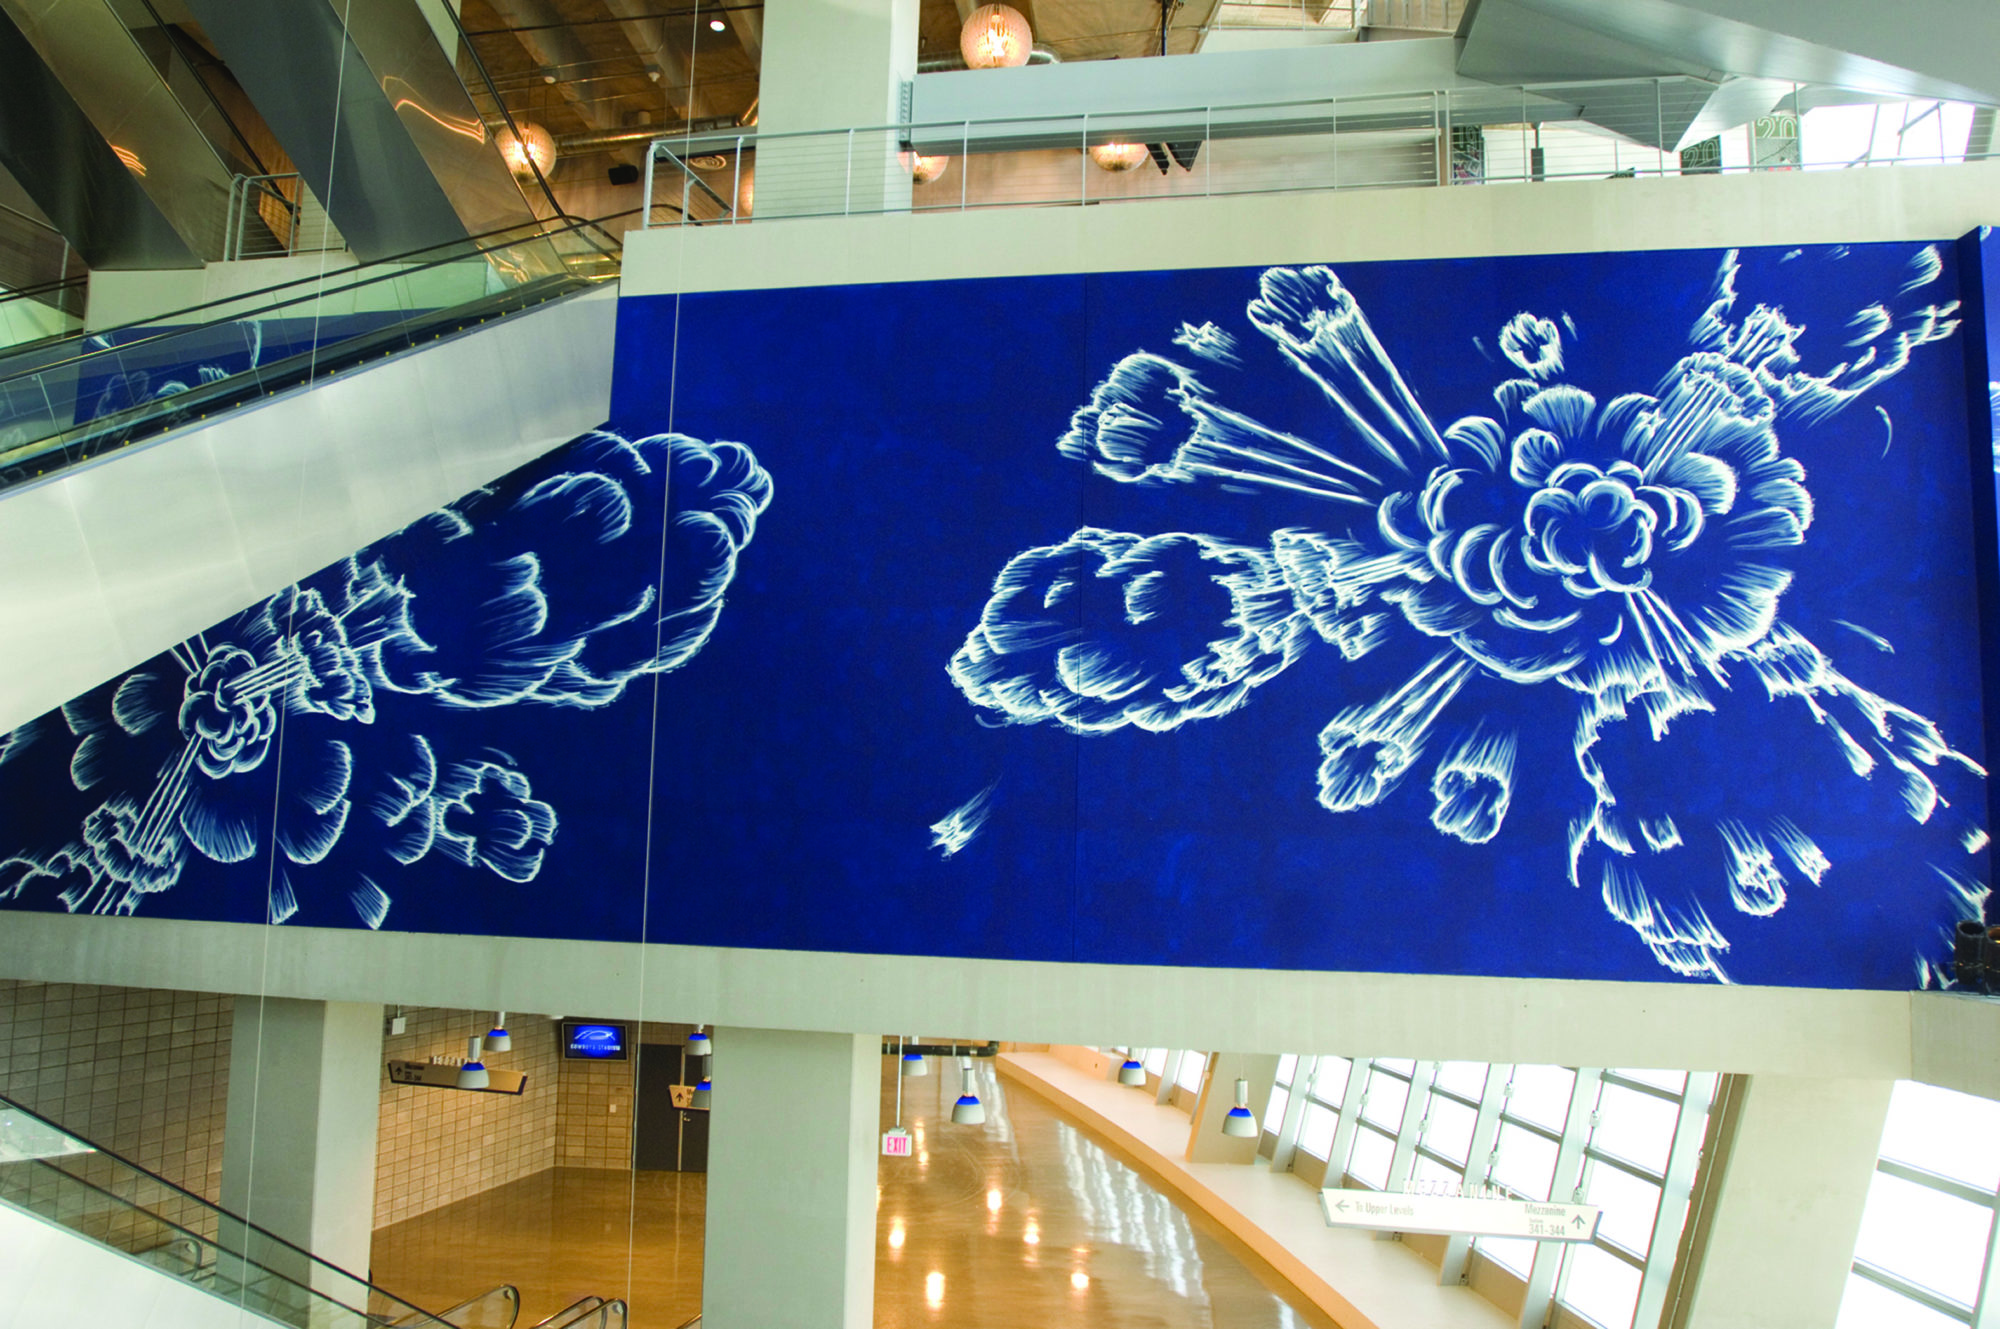 Gary Simmons' site-specific commission Blue Field Explosions is shown in the Northeast Monumental Staircase of the AT&T Stadium. Blue cloud shaped puffs appear to explode.